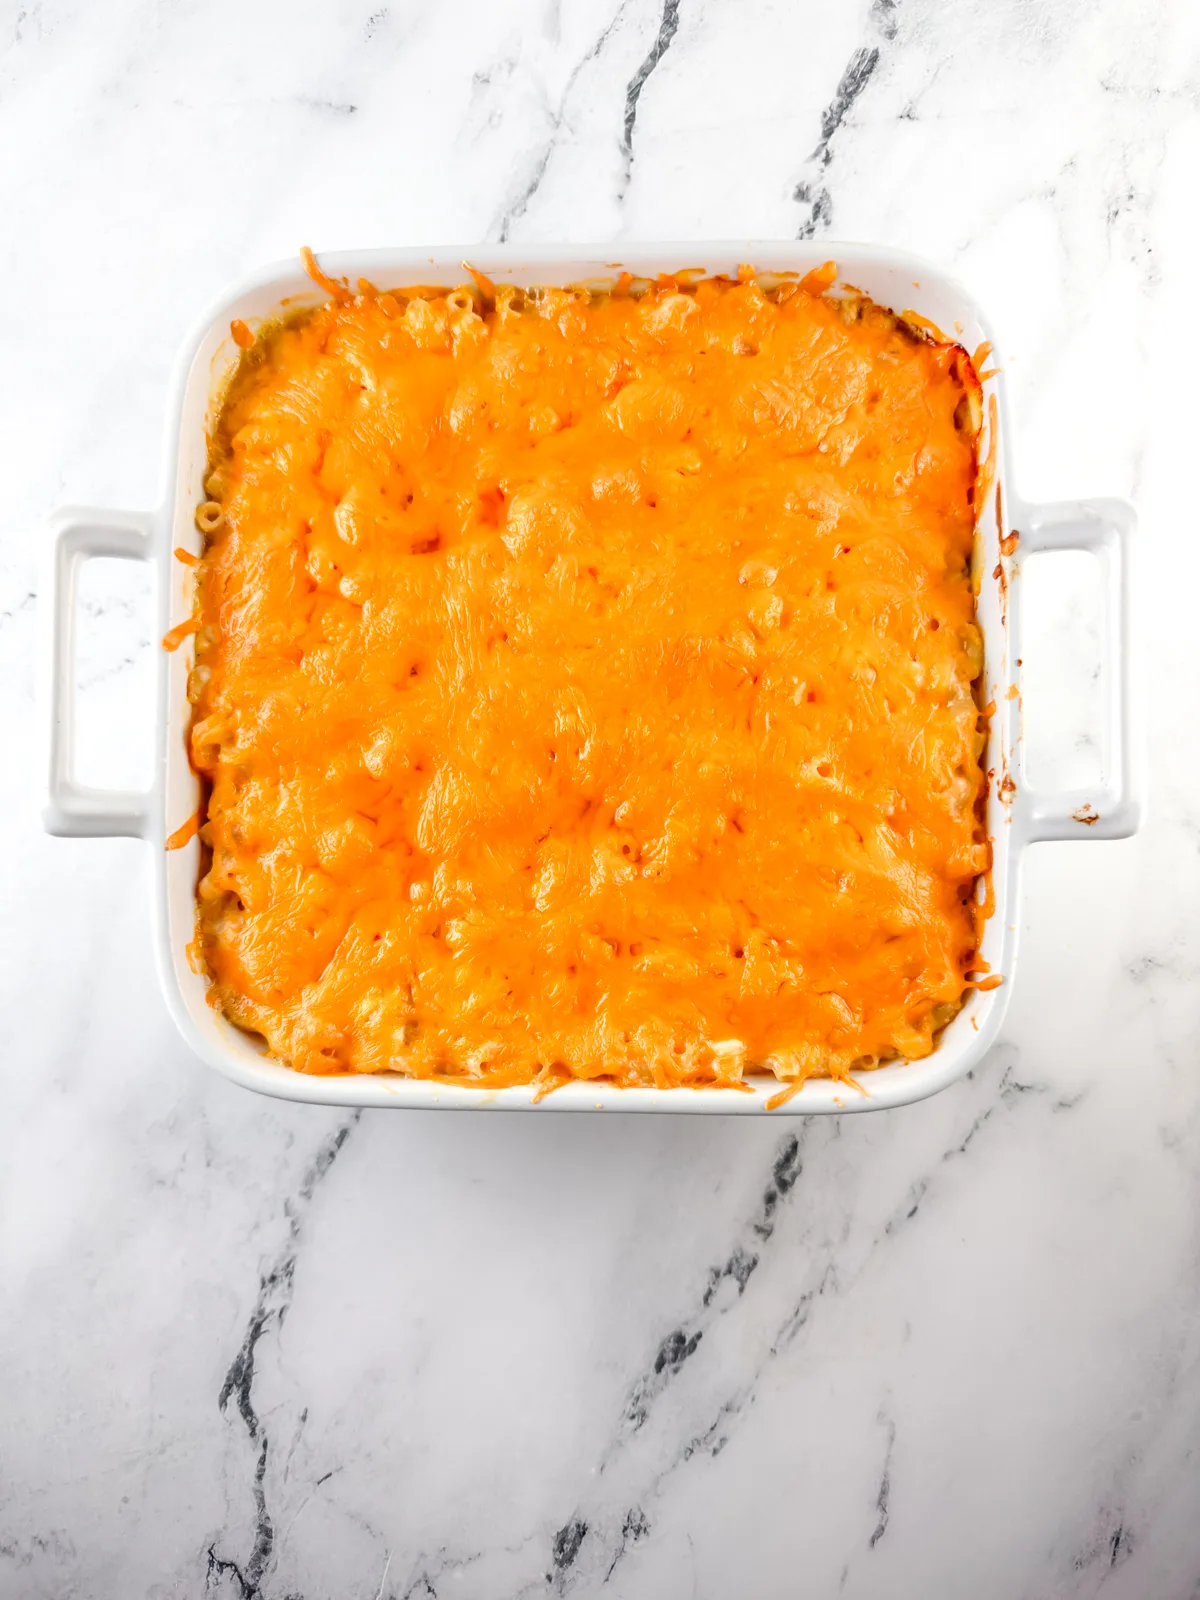 Baked macaroni and cheese in a white square baking dish.